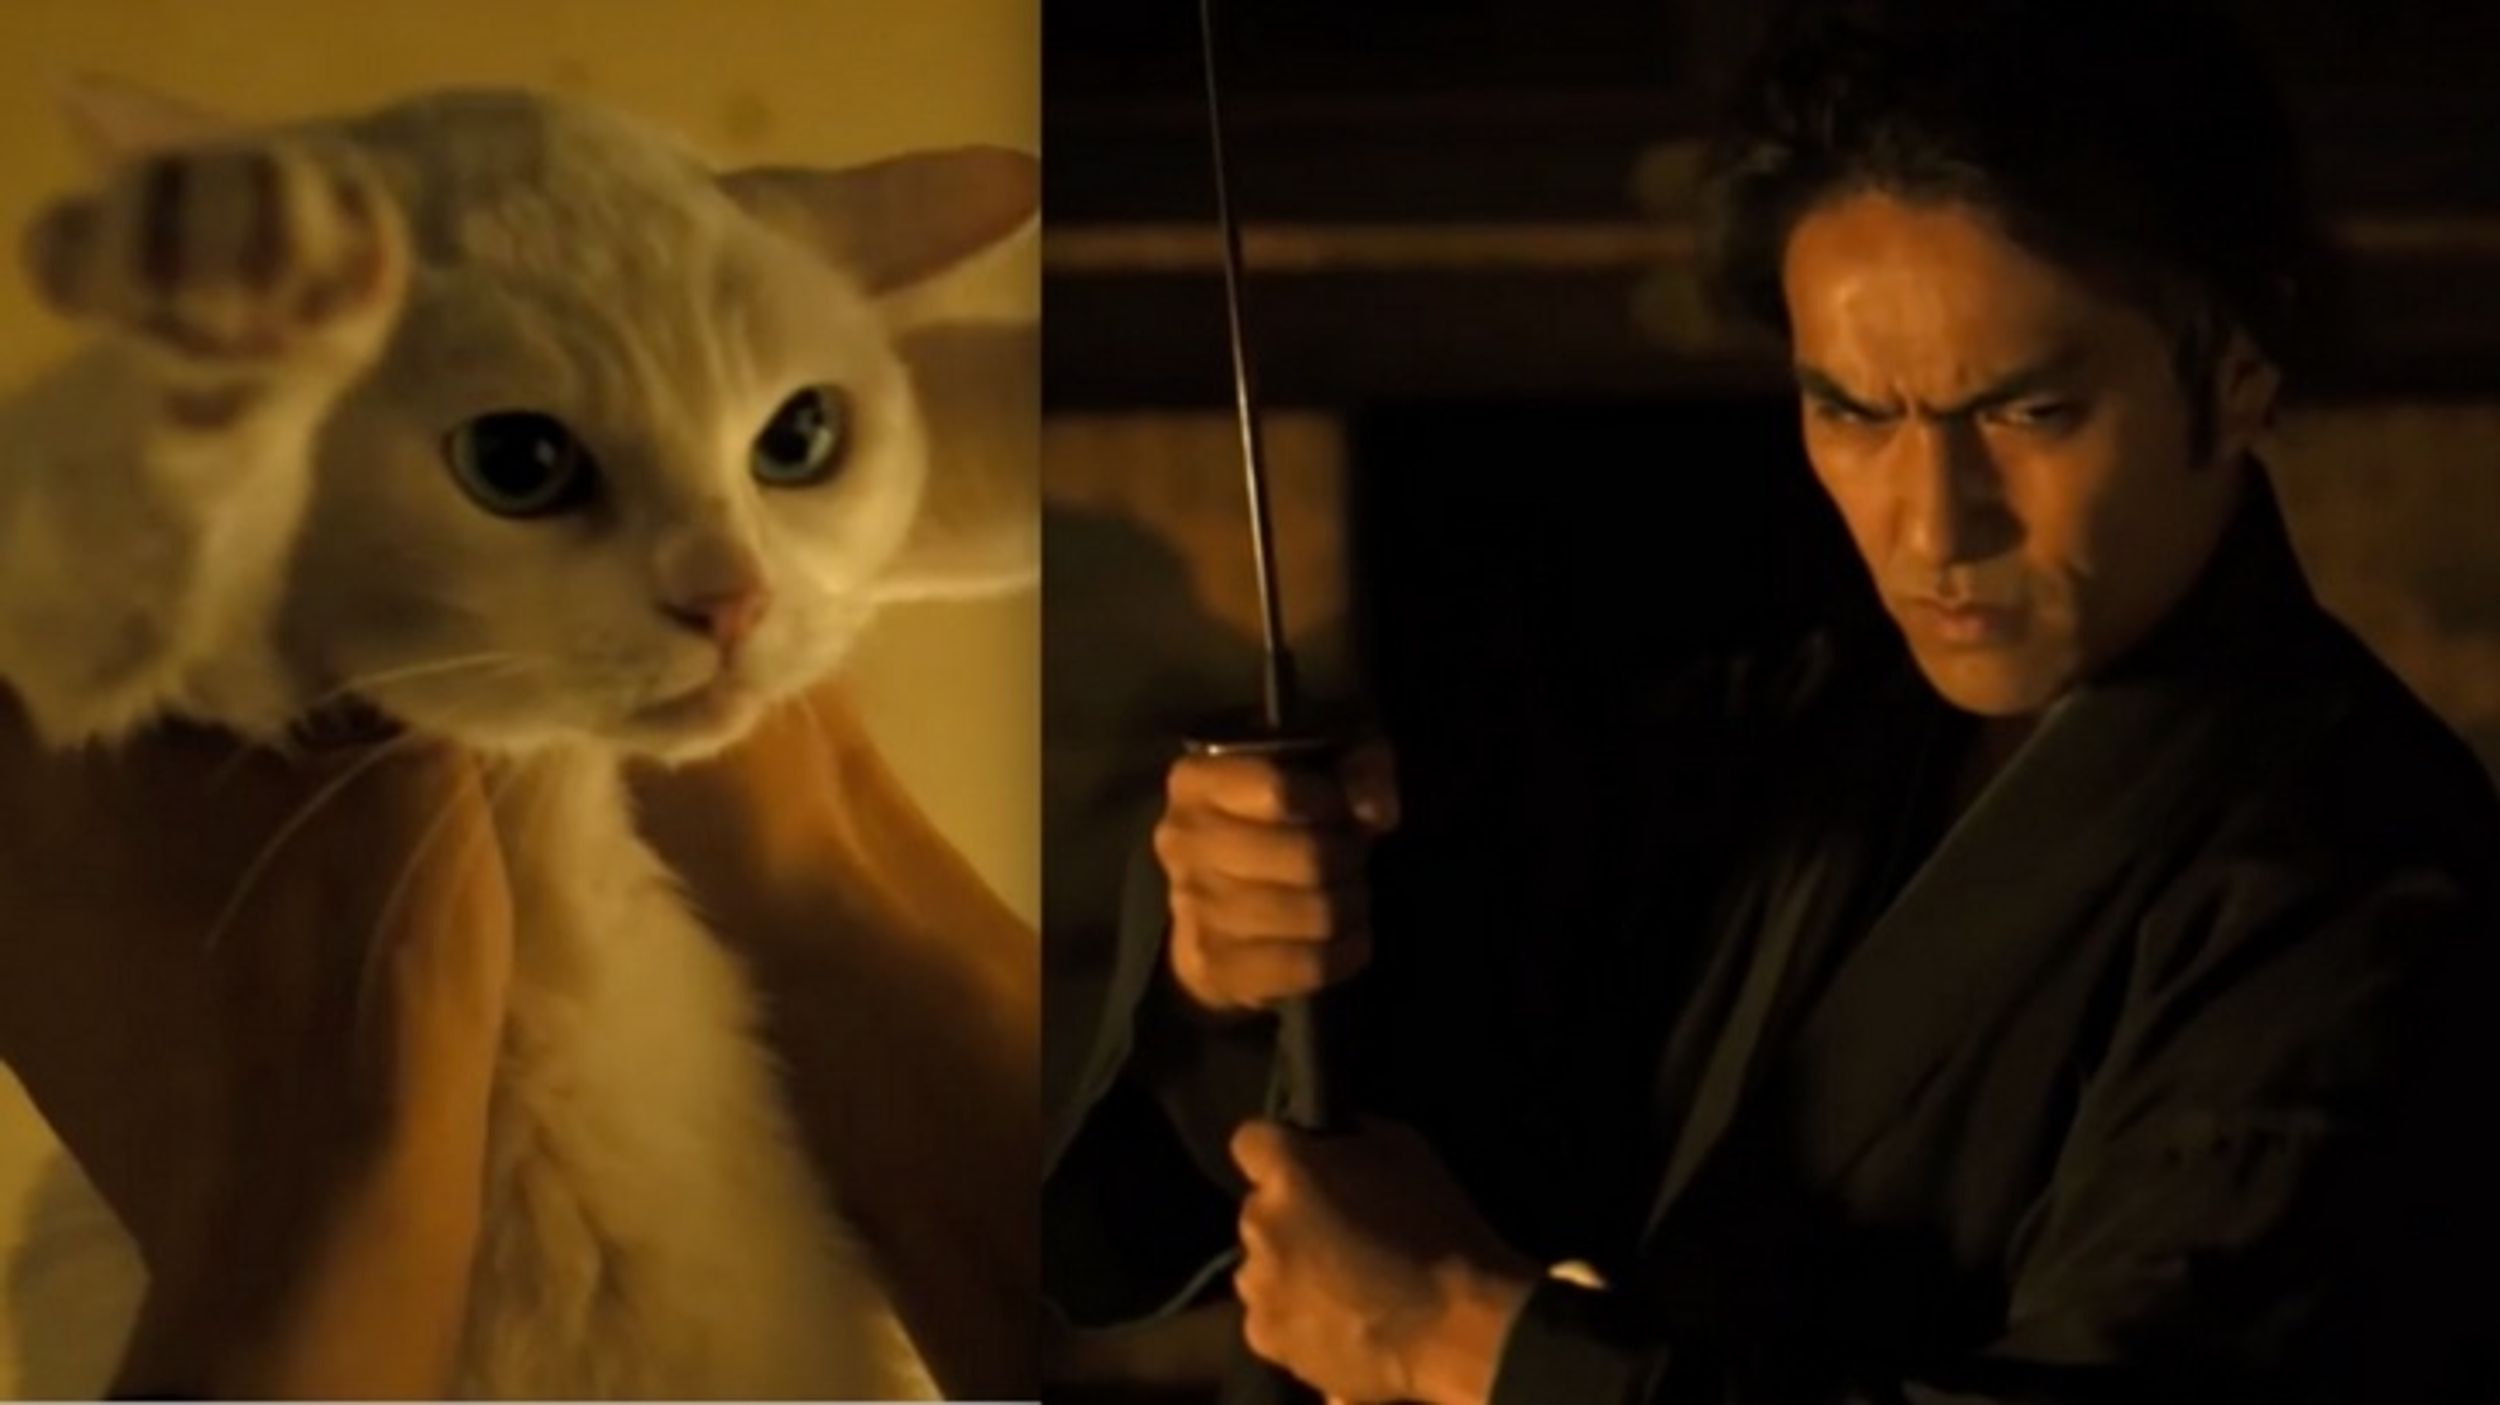 The 2014 Japanese Film 'Samurai Cat' Continues Stealing Hearts & Creates More Intrigue on Twitter